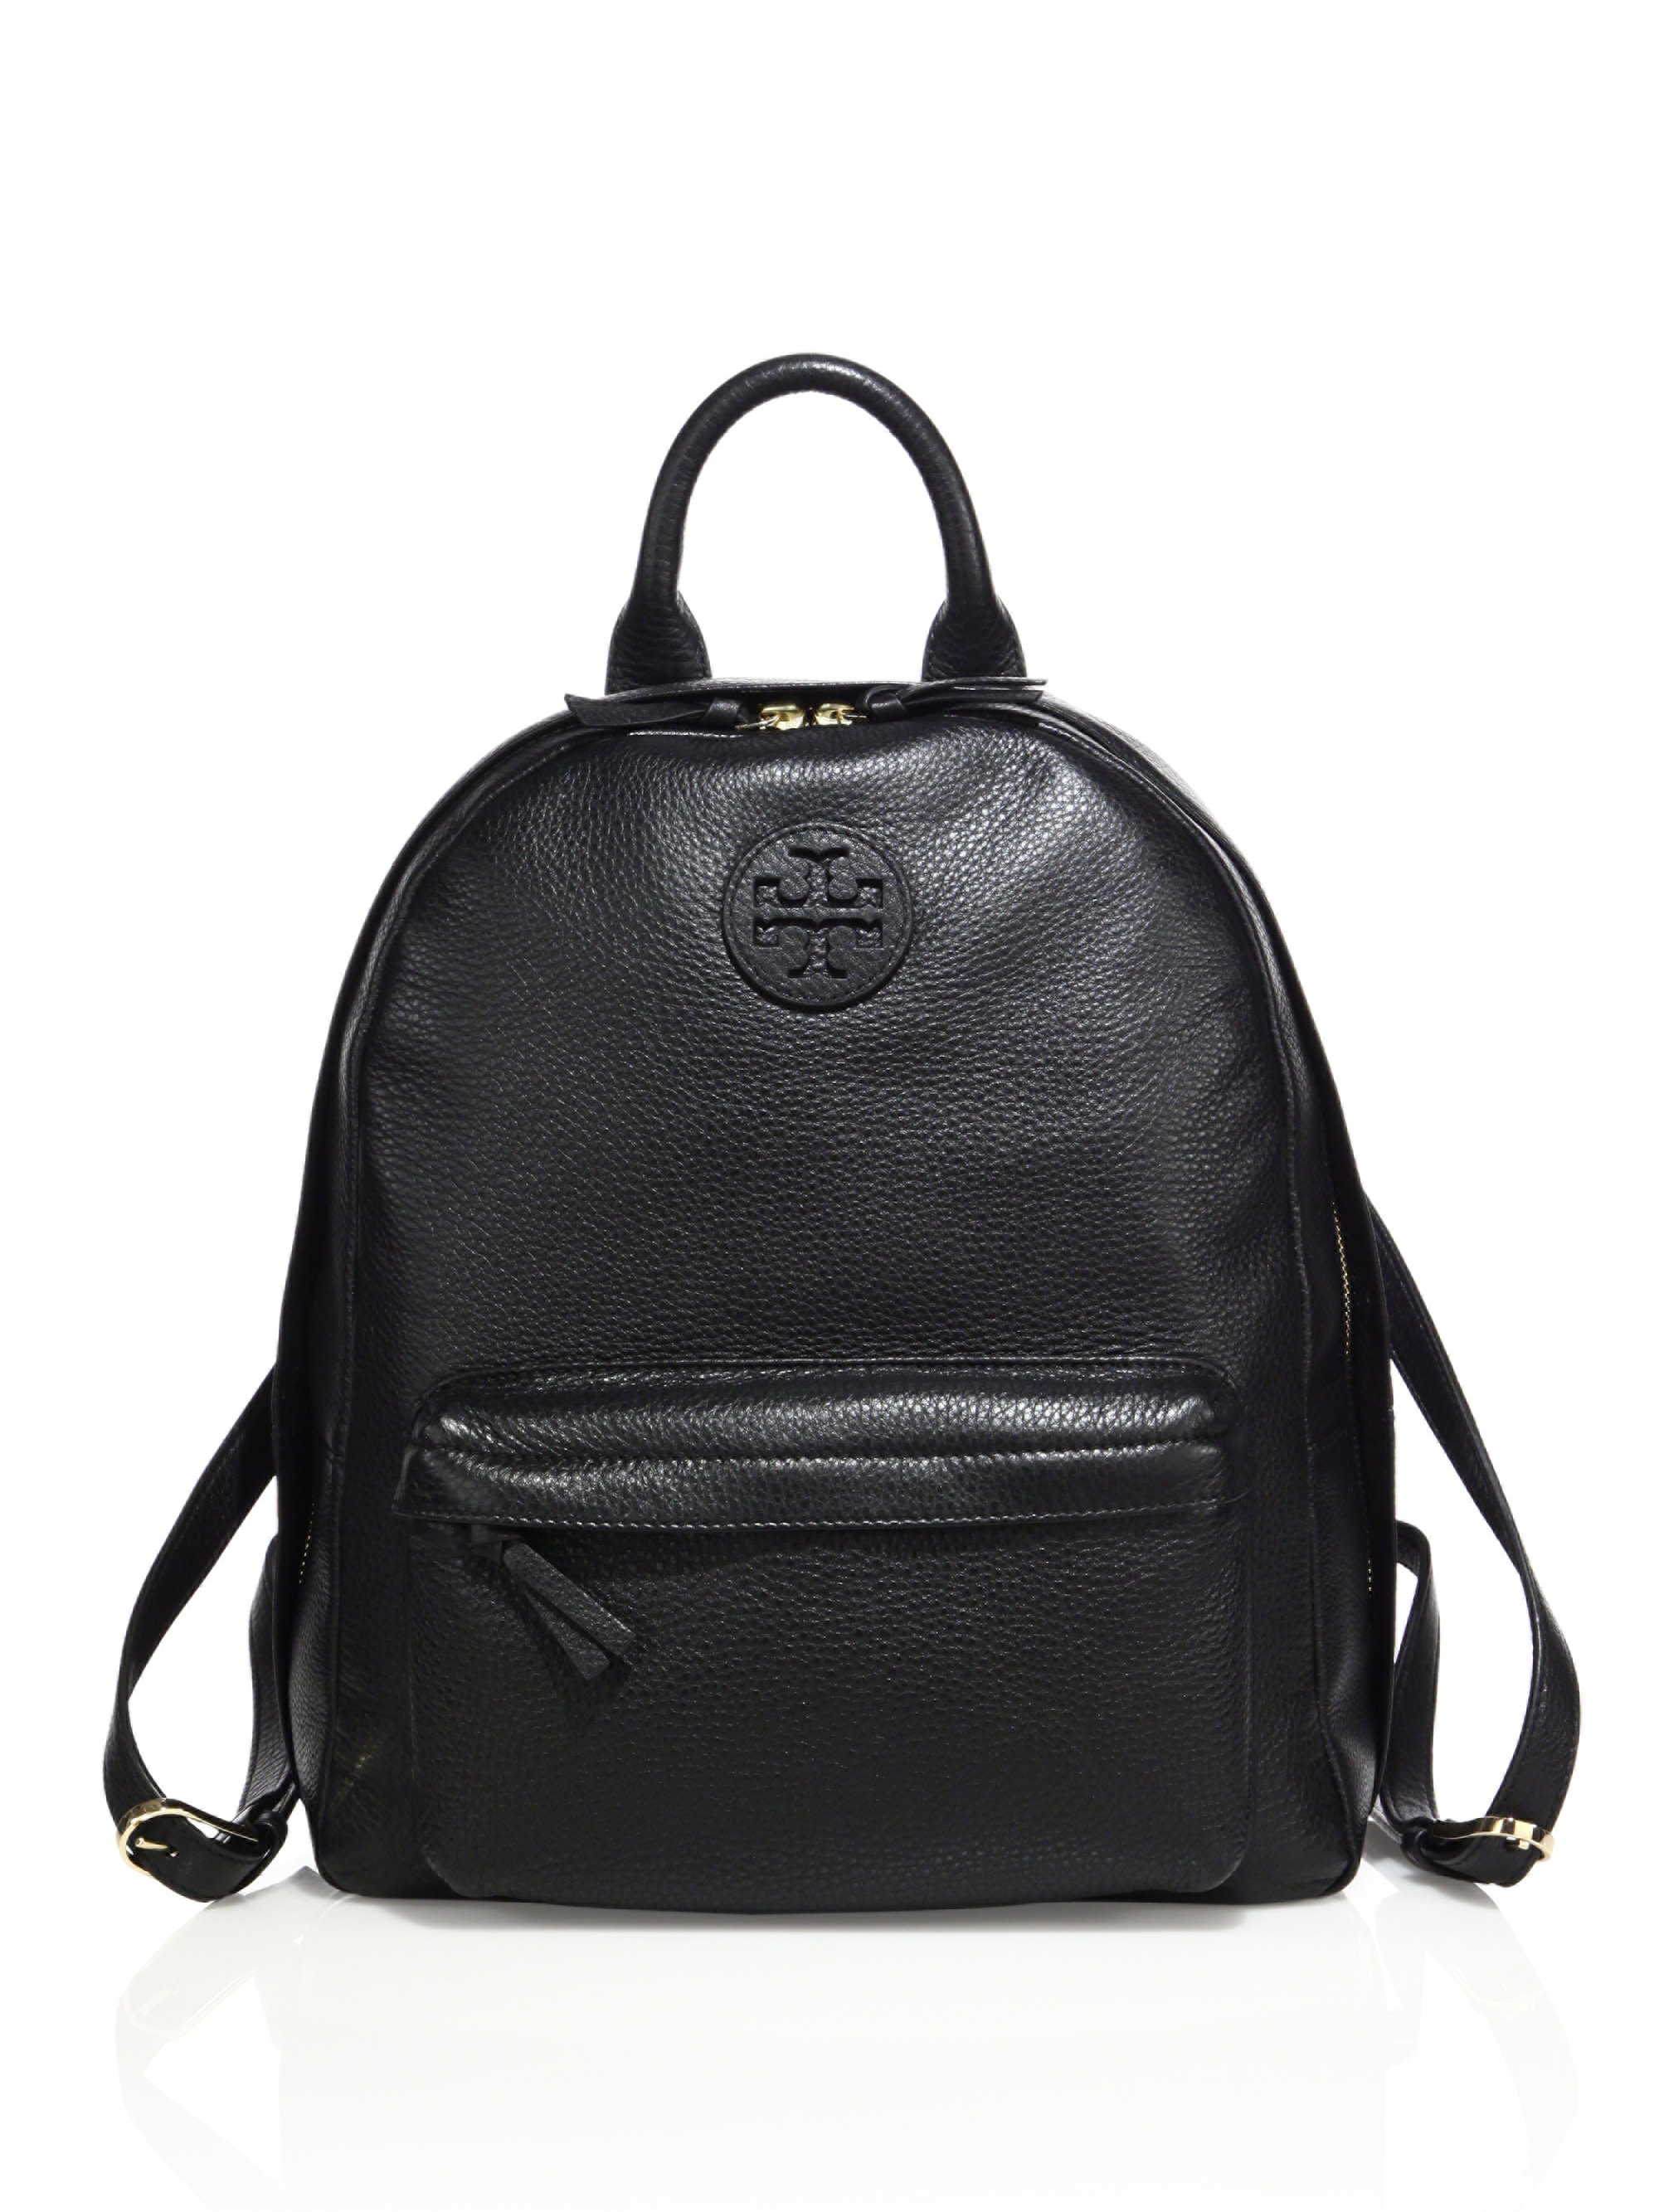 Lyst - Tory Burch Leather Backpack in Black